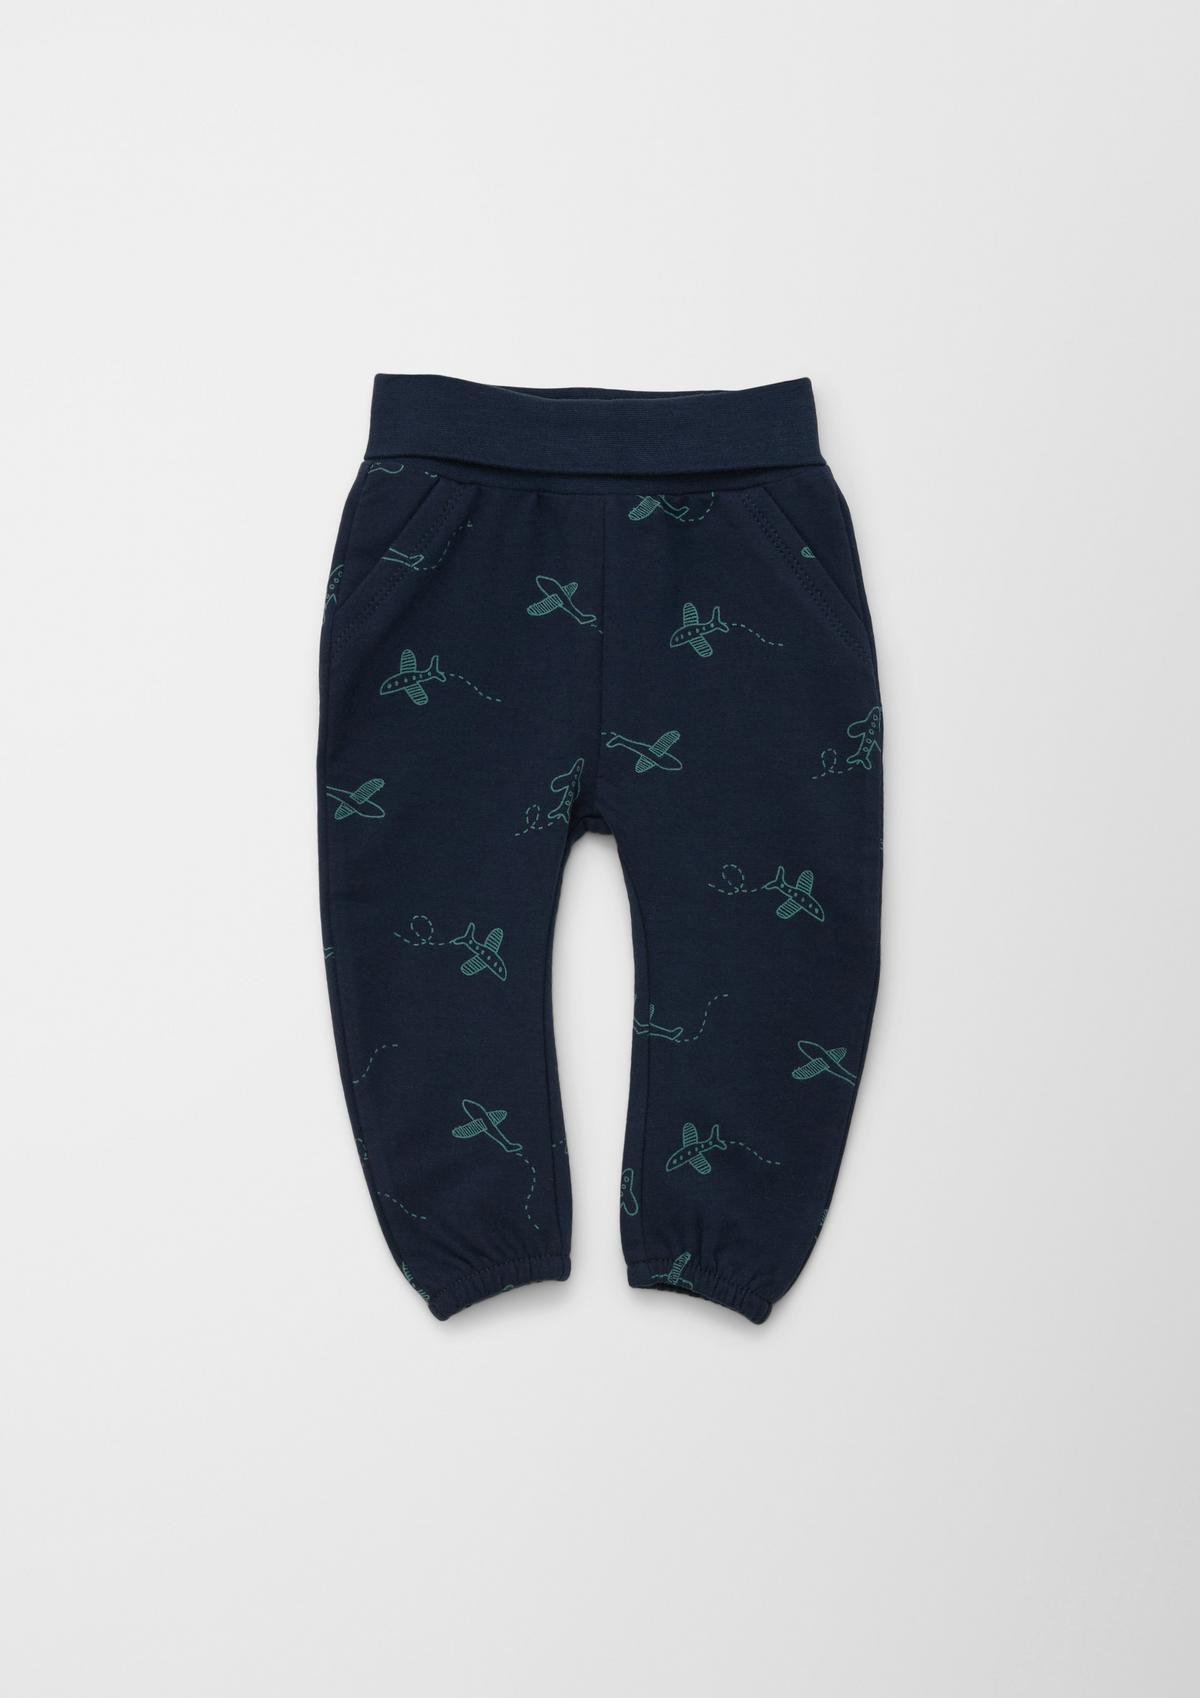 s.Oliver Tracksuit bottoms with aeroplane prints